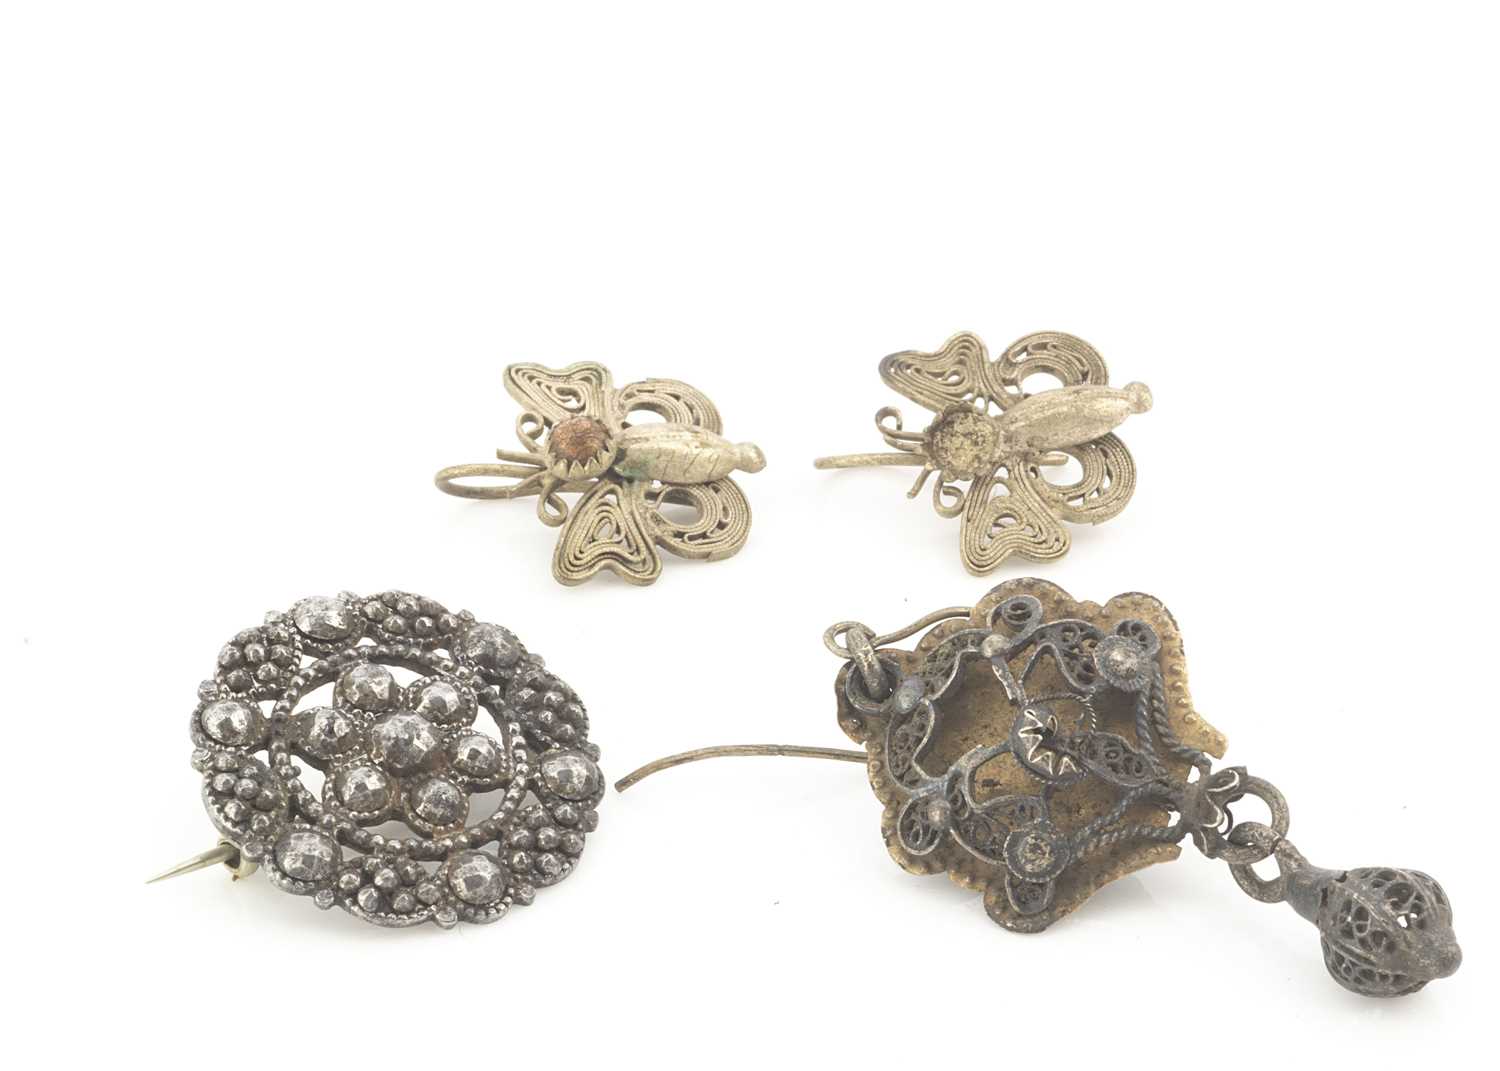 Lot 60 - An early 19th century steel and base metal target brooch